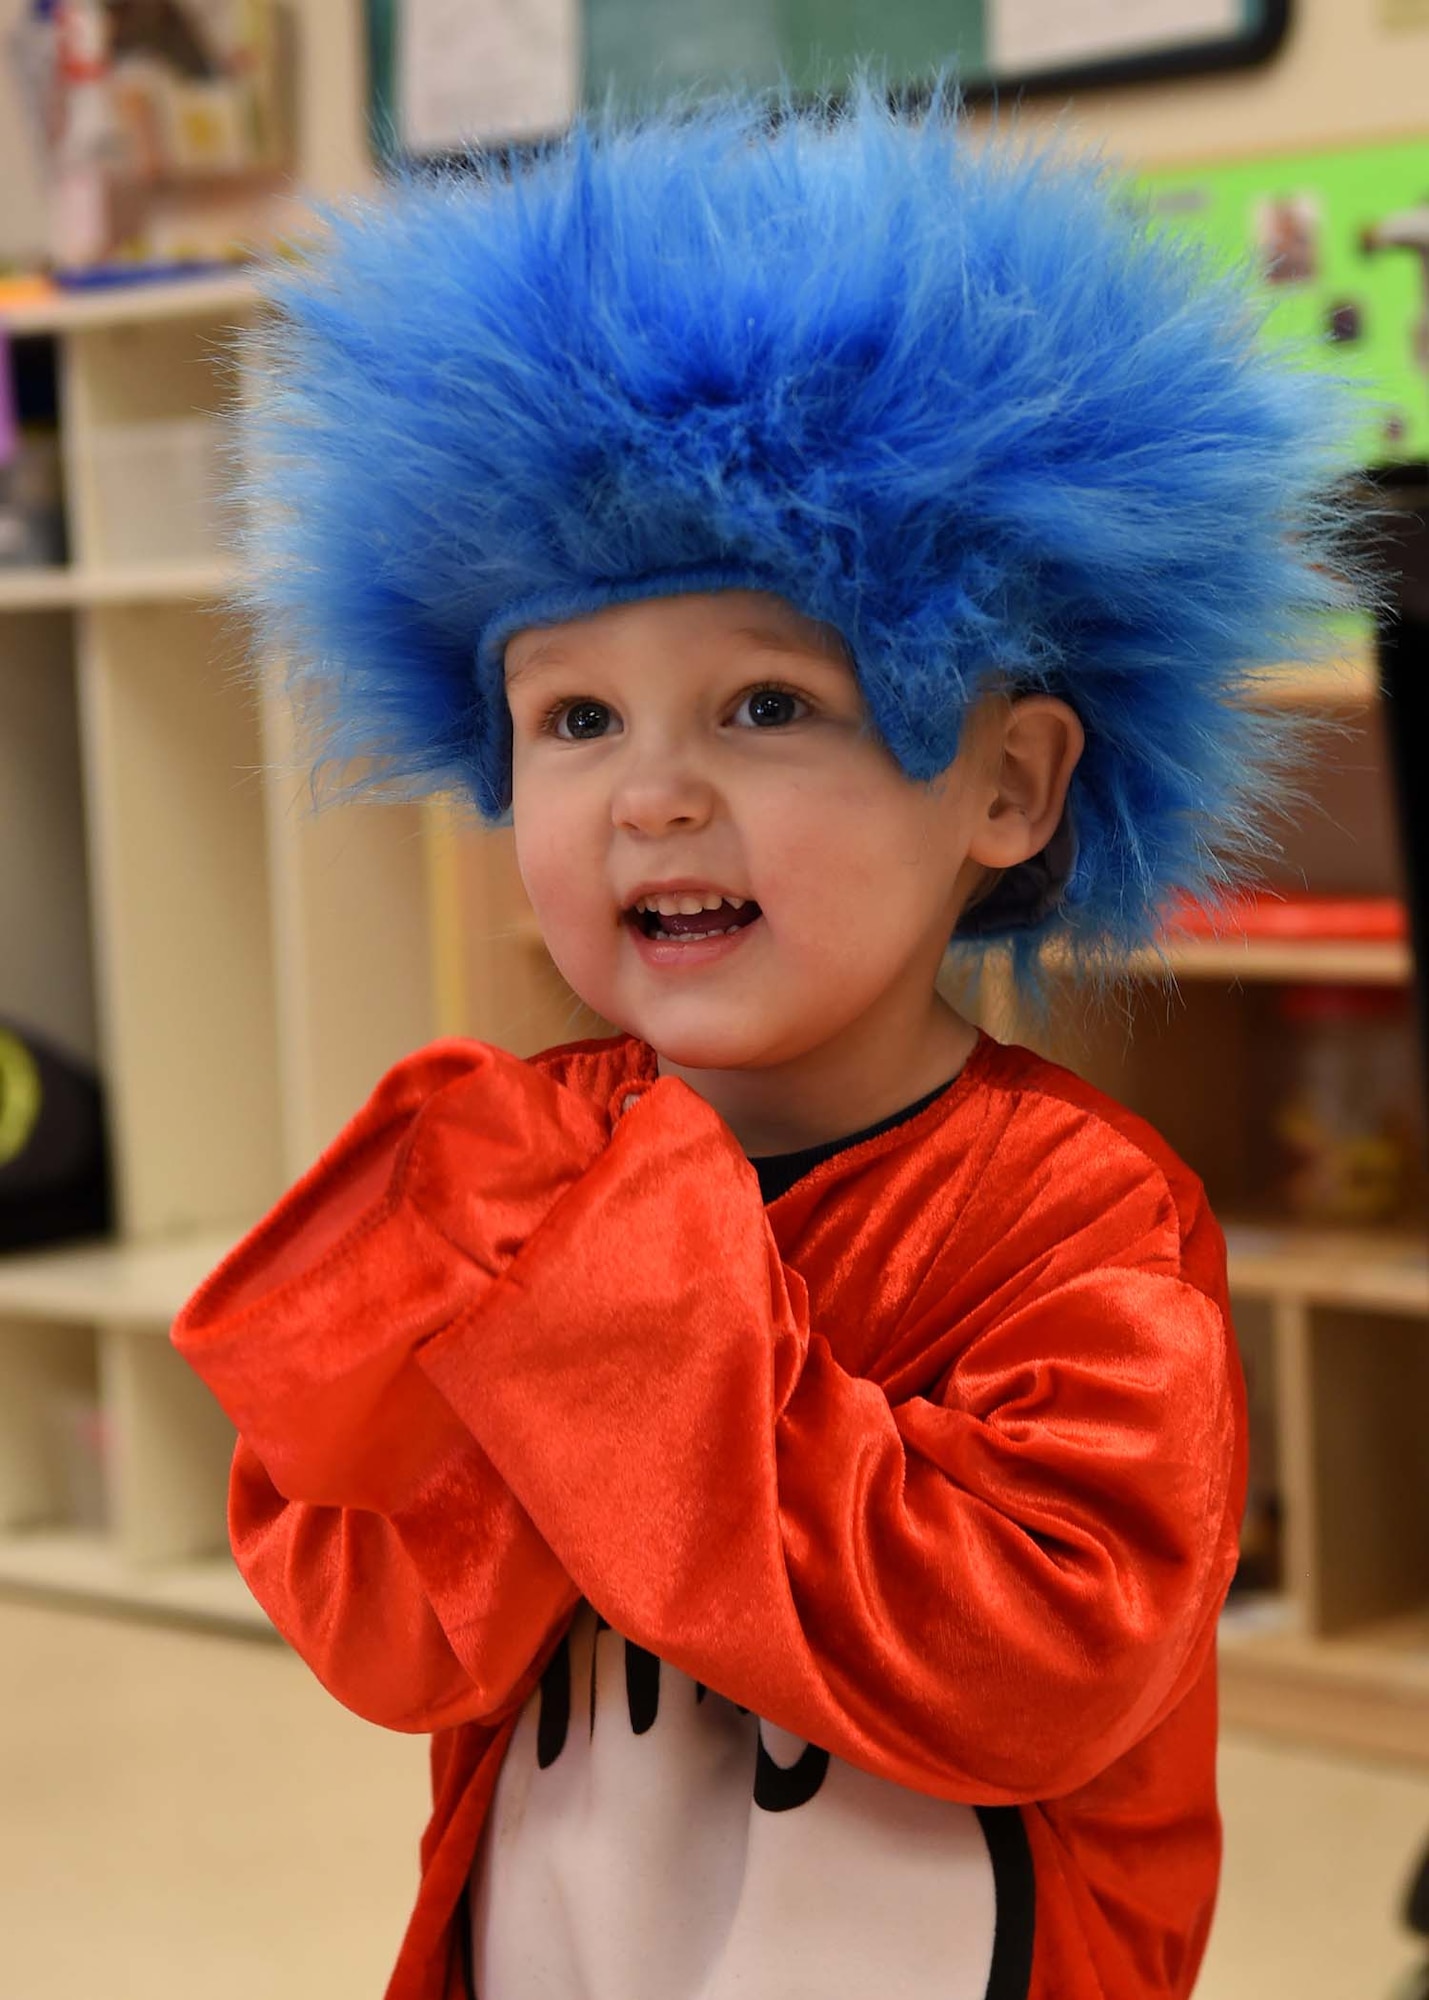 The Child Development Centers on Buckley Air Force Base celebrated Read Across America March 1st, 2019. The children spent the day learning the importance of reading and participated in Dr. Suess themed activities such as themed snack time and a poster decorating competition.